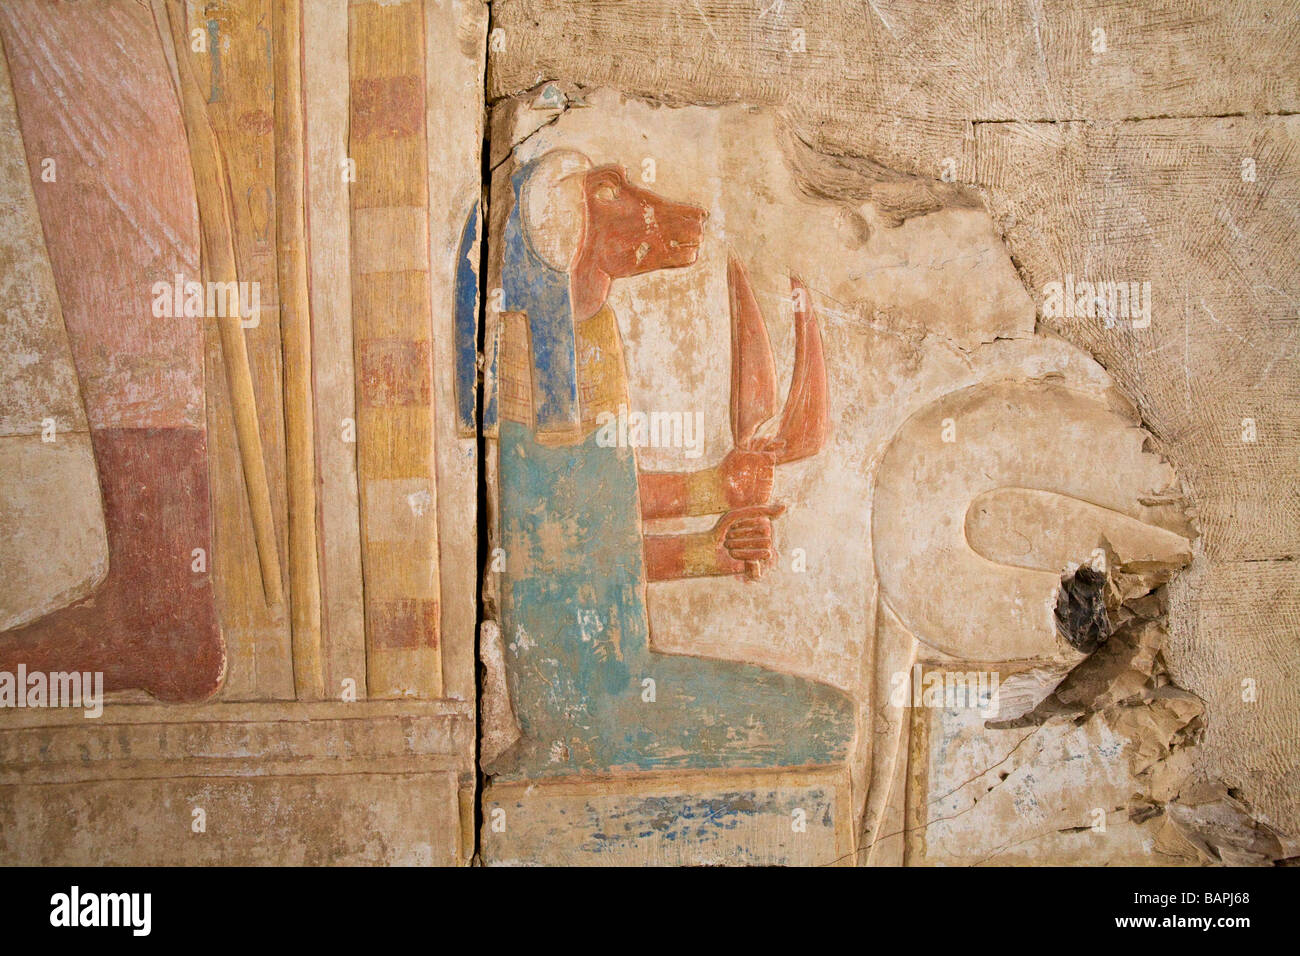 Painted reliefs on the inner  walls of the Temple of Ramesses II at Abydos, Nile Valley Egypt Stock Photo